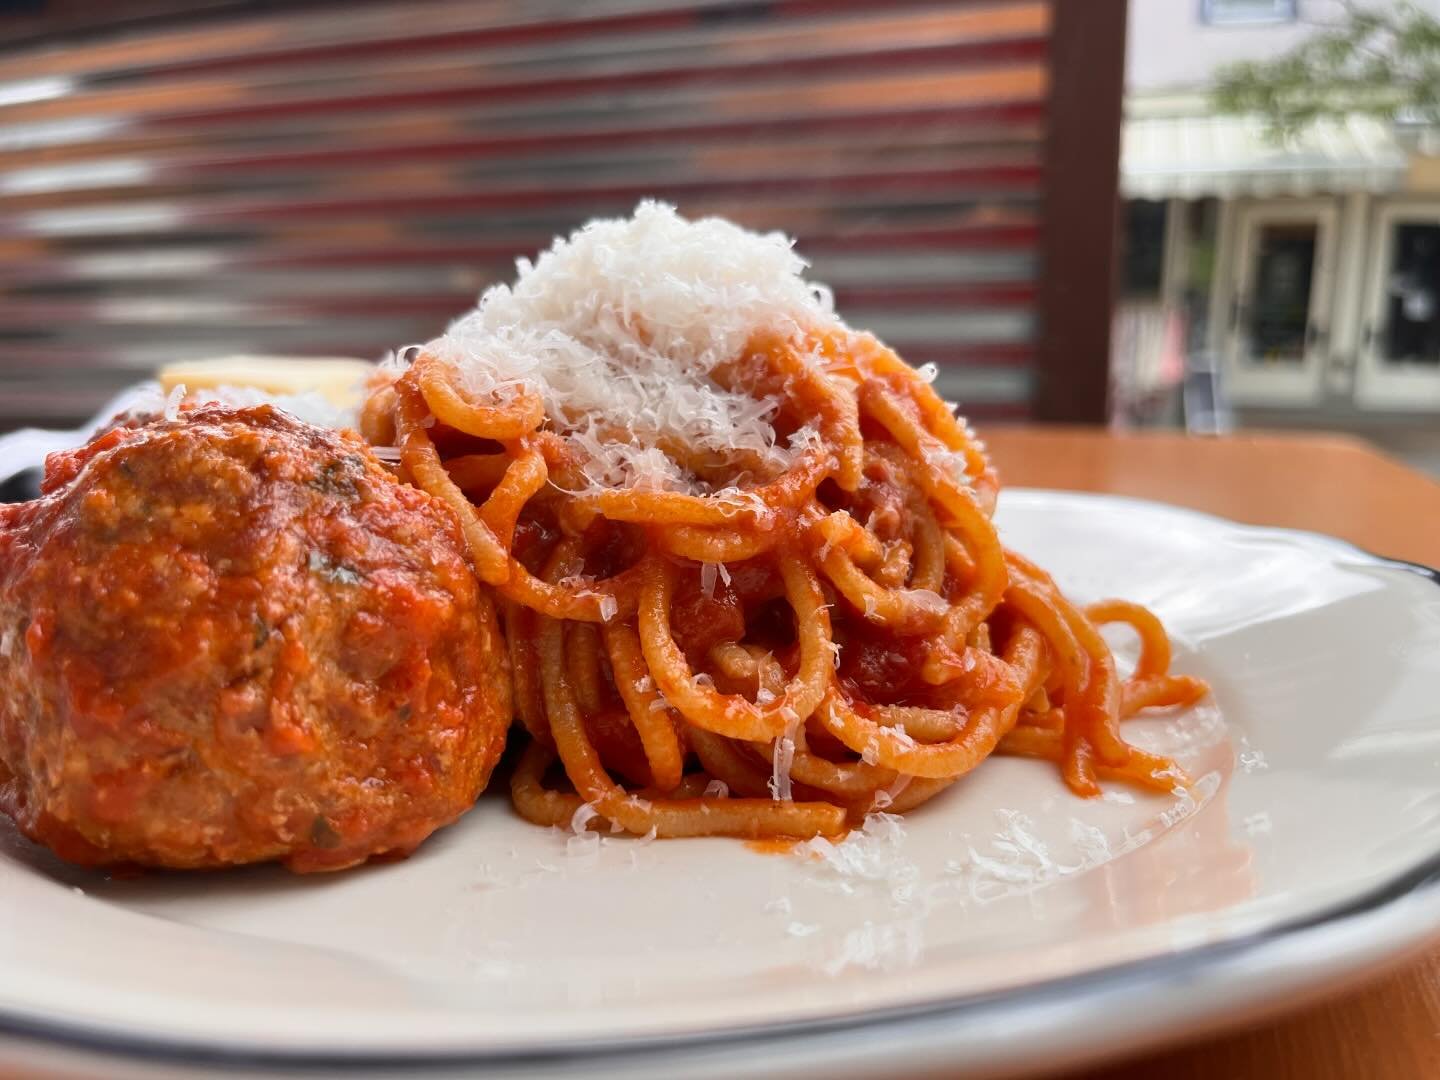 Shout out to all the moms out there. Spaghetti and meatballs on the menu today. Moms, you don&rsquo;t even have to come with your family, it can just be you, your food, and a glass of wine with no one asking you questions aside from &ldquo;would you 